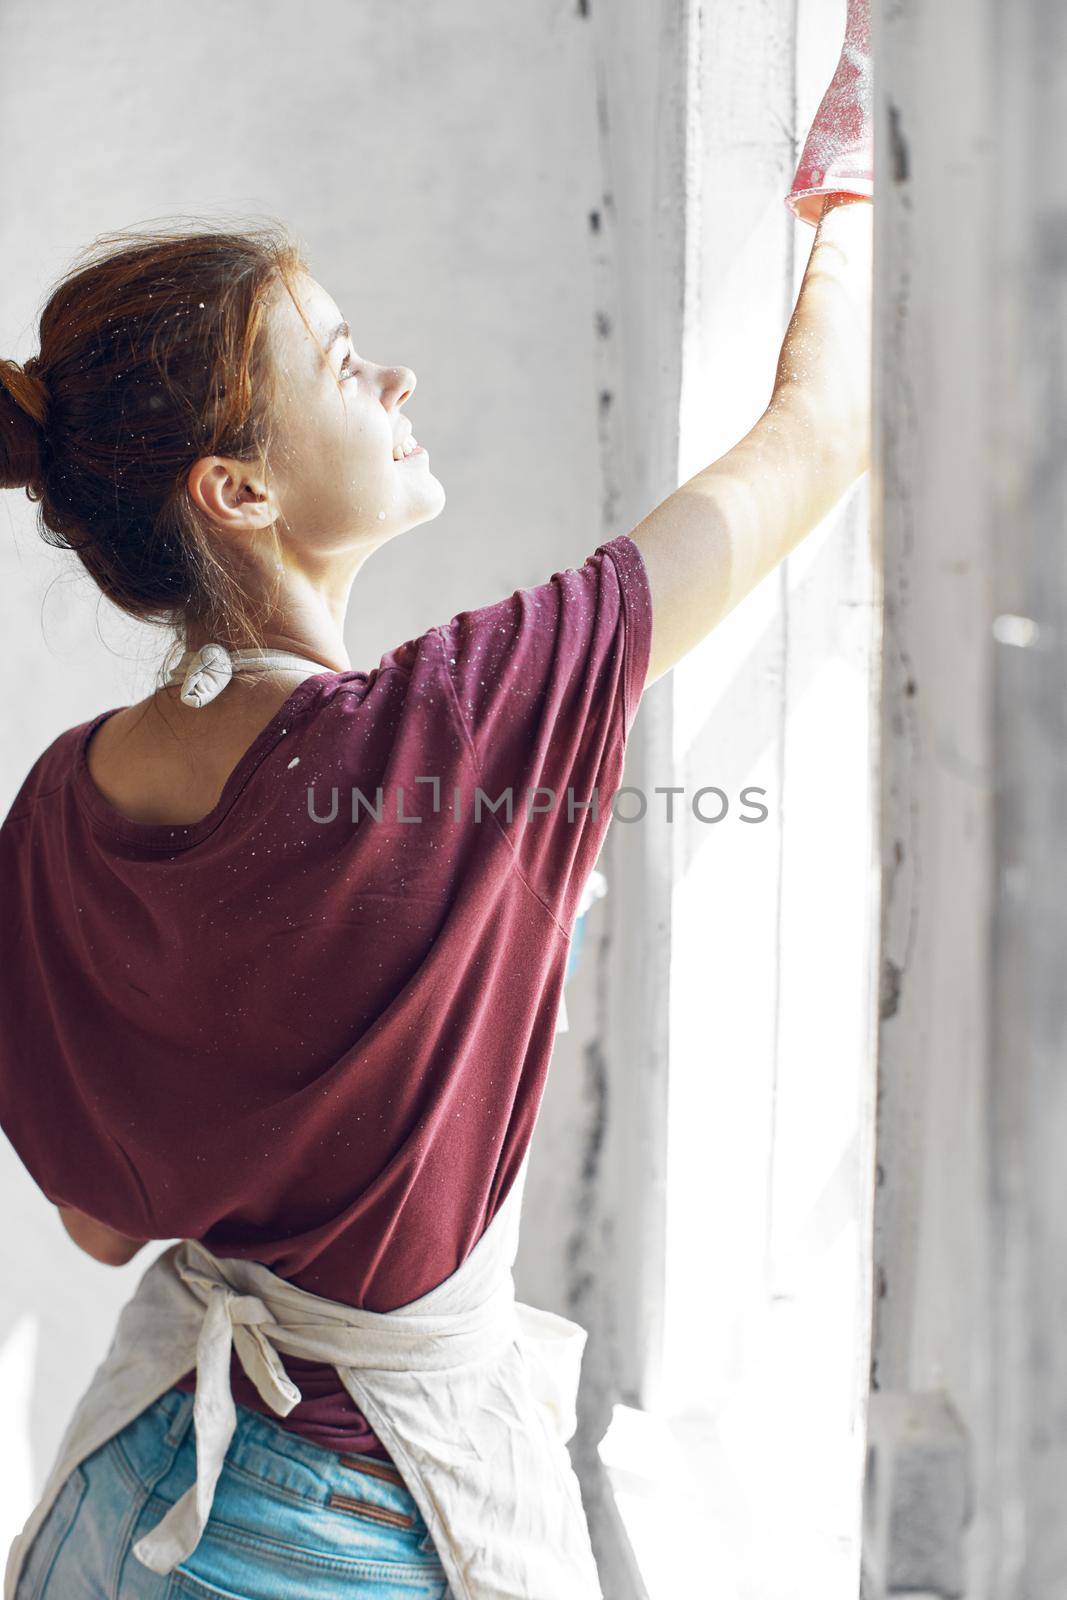 woman paints the window in the room interior renovation decoration. High quality photo